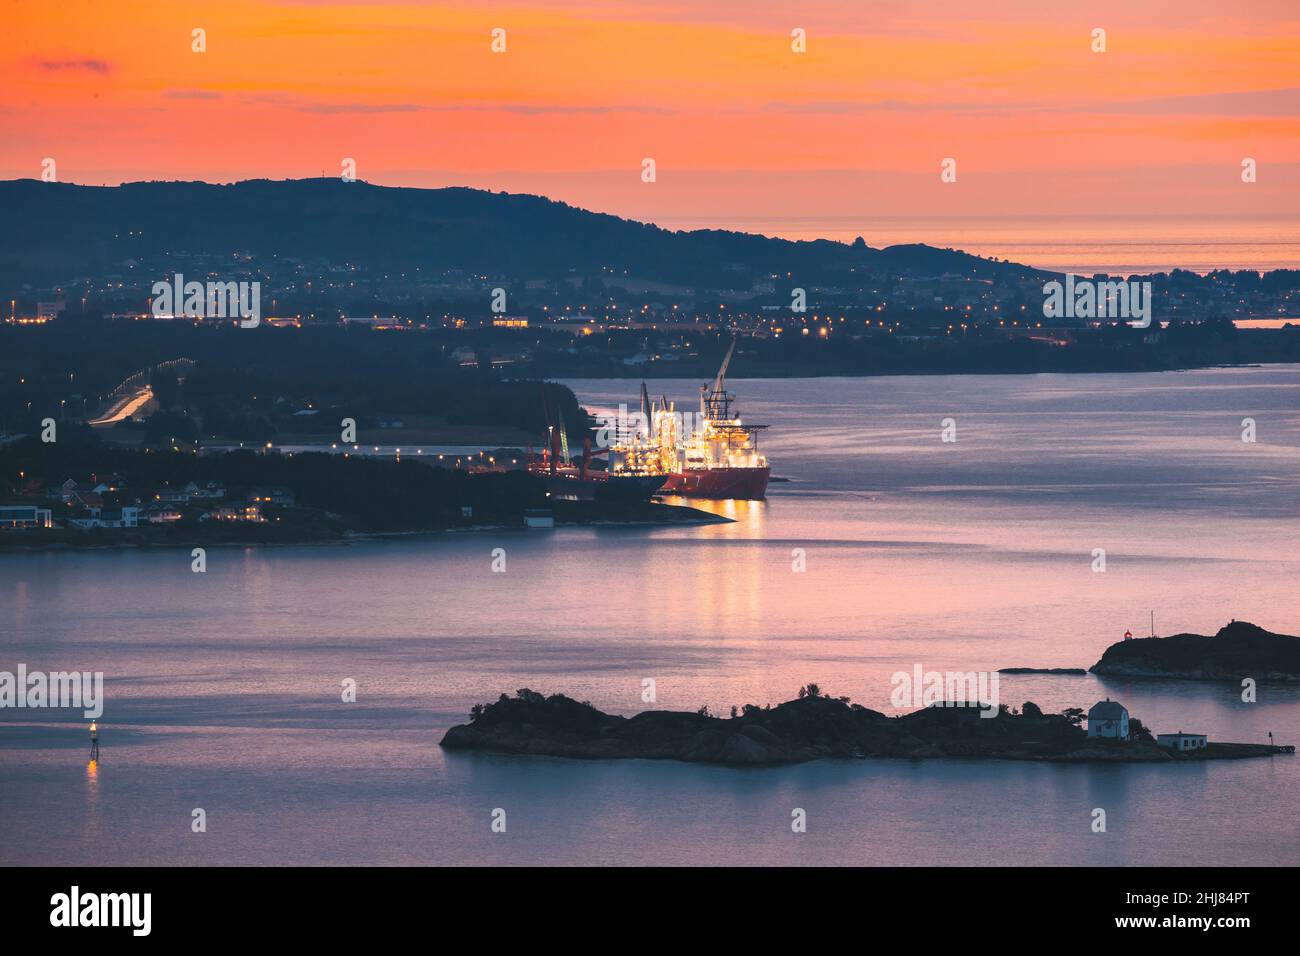 Alesund, Norway. Night View Of Moored Ship In Alesund Island. Summer Morning. Stock Photo